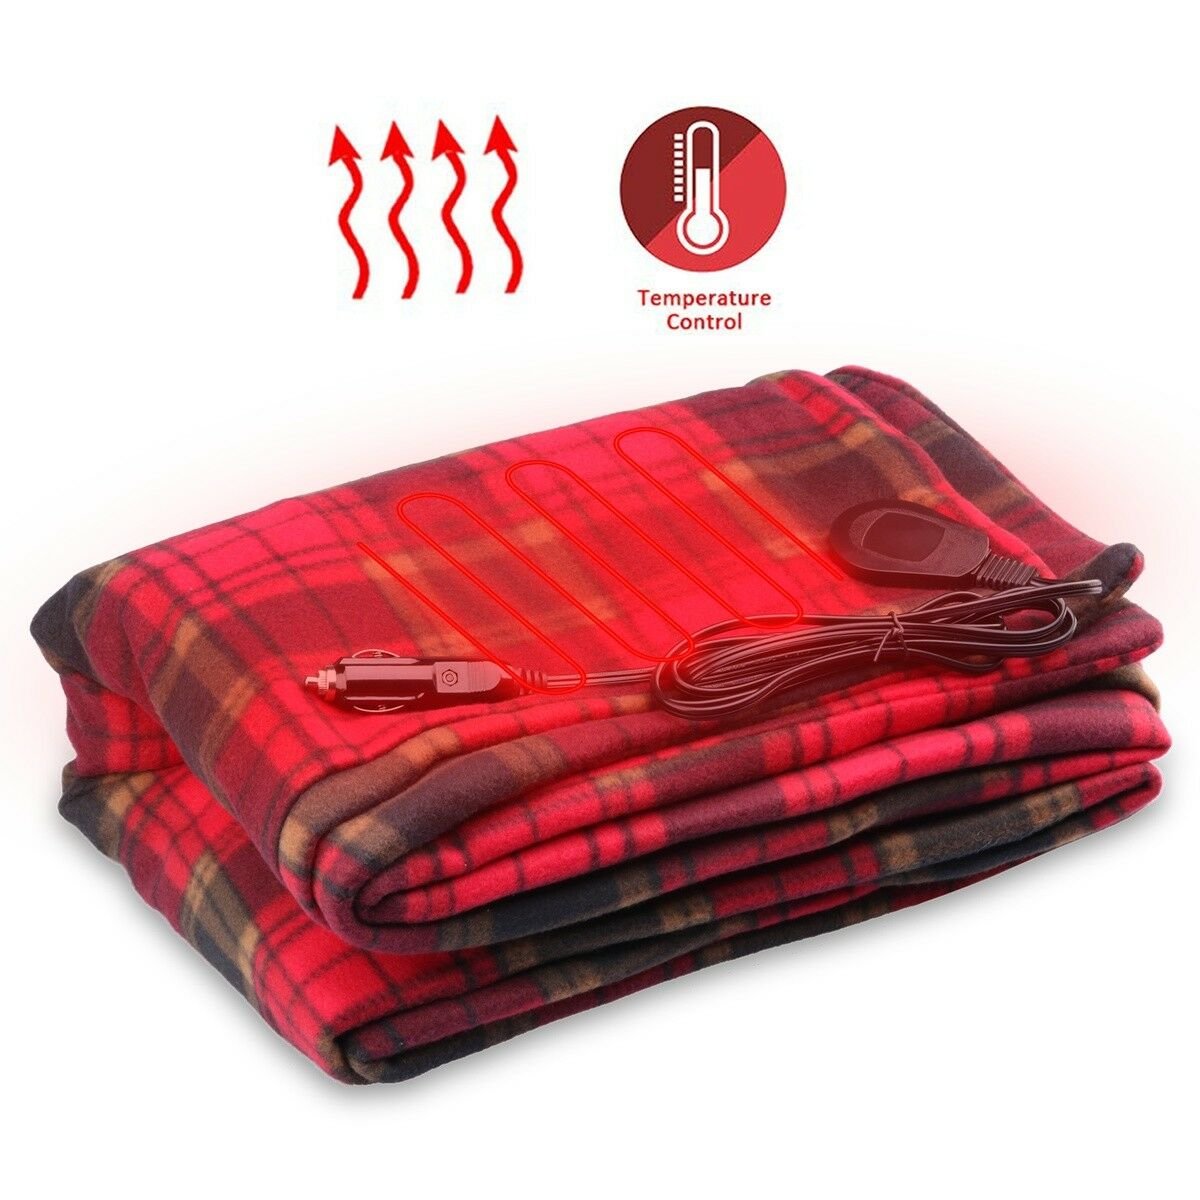 ❄Winter Specials- SAVE 48% OFF⛄Woa Car Heating Blanket-FREE SHIPPING TODAY